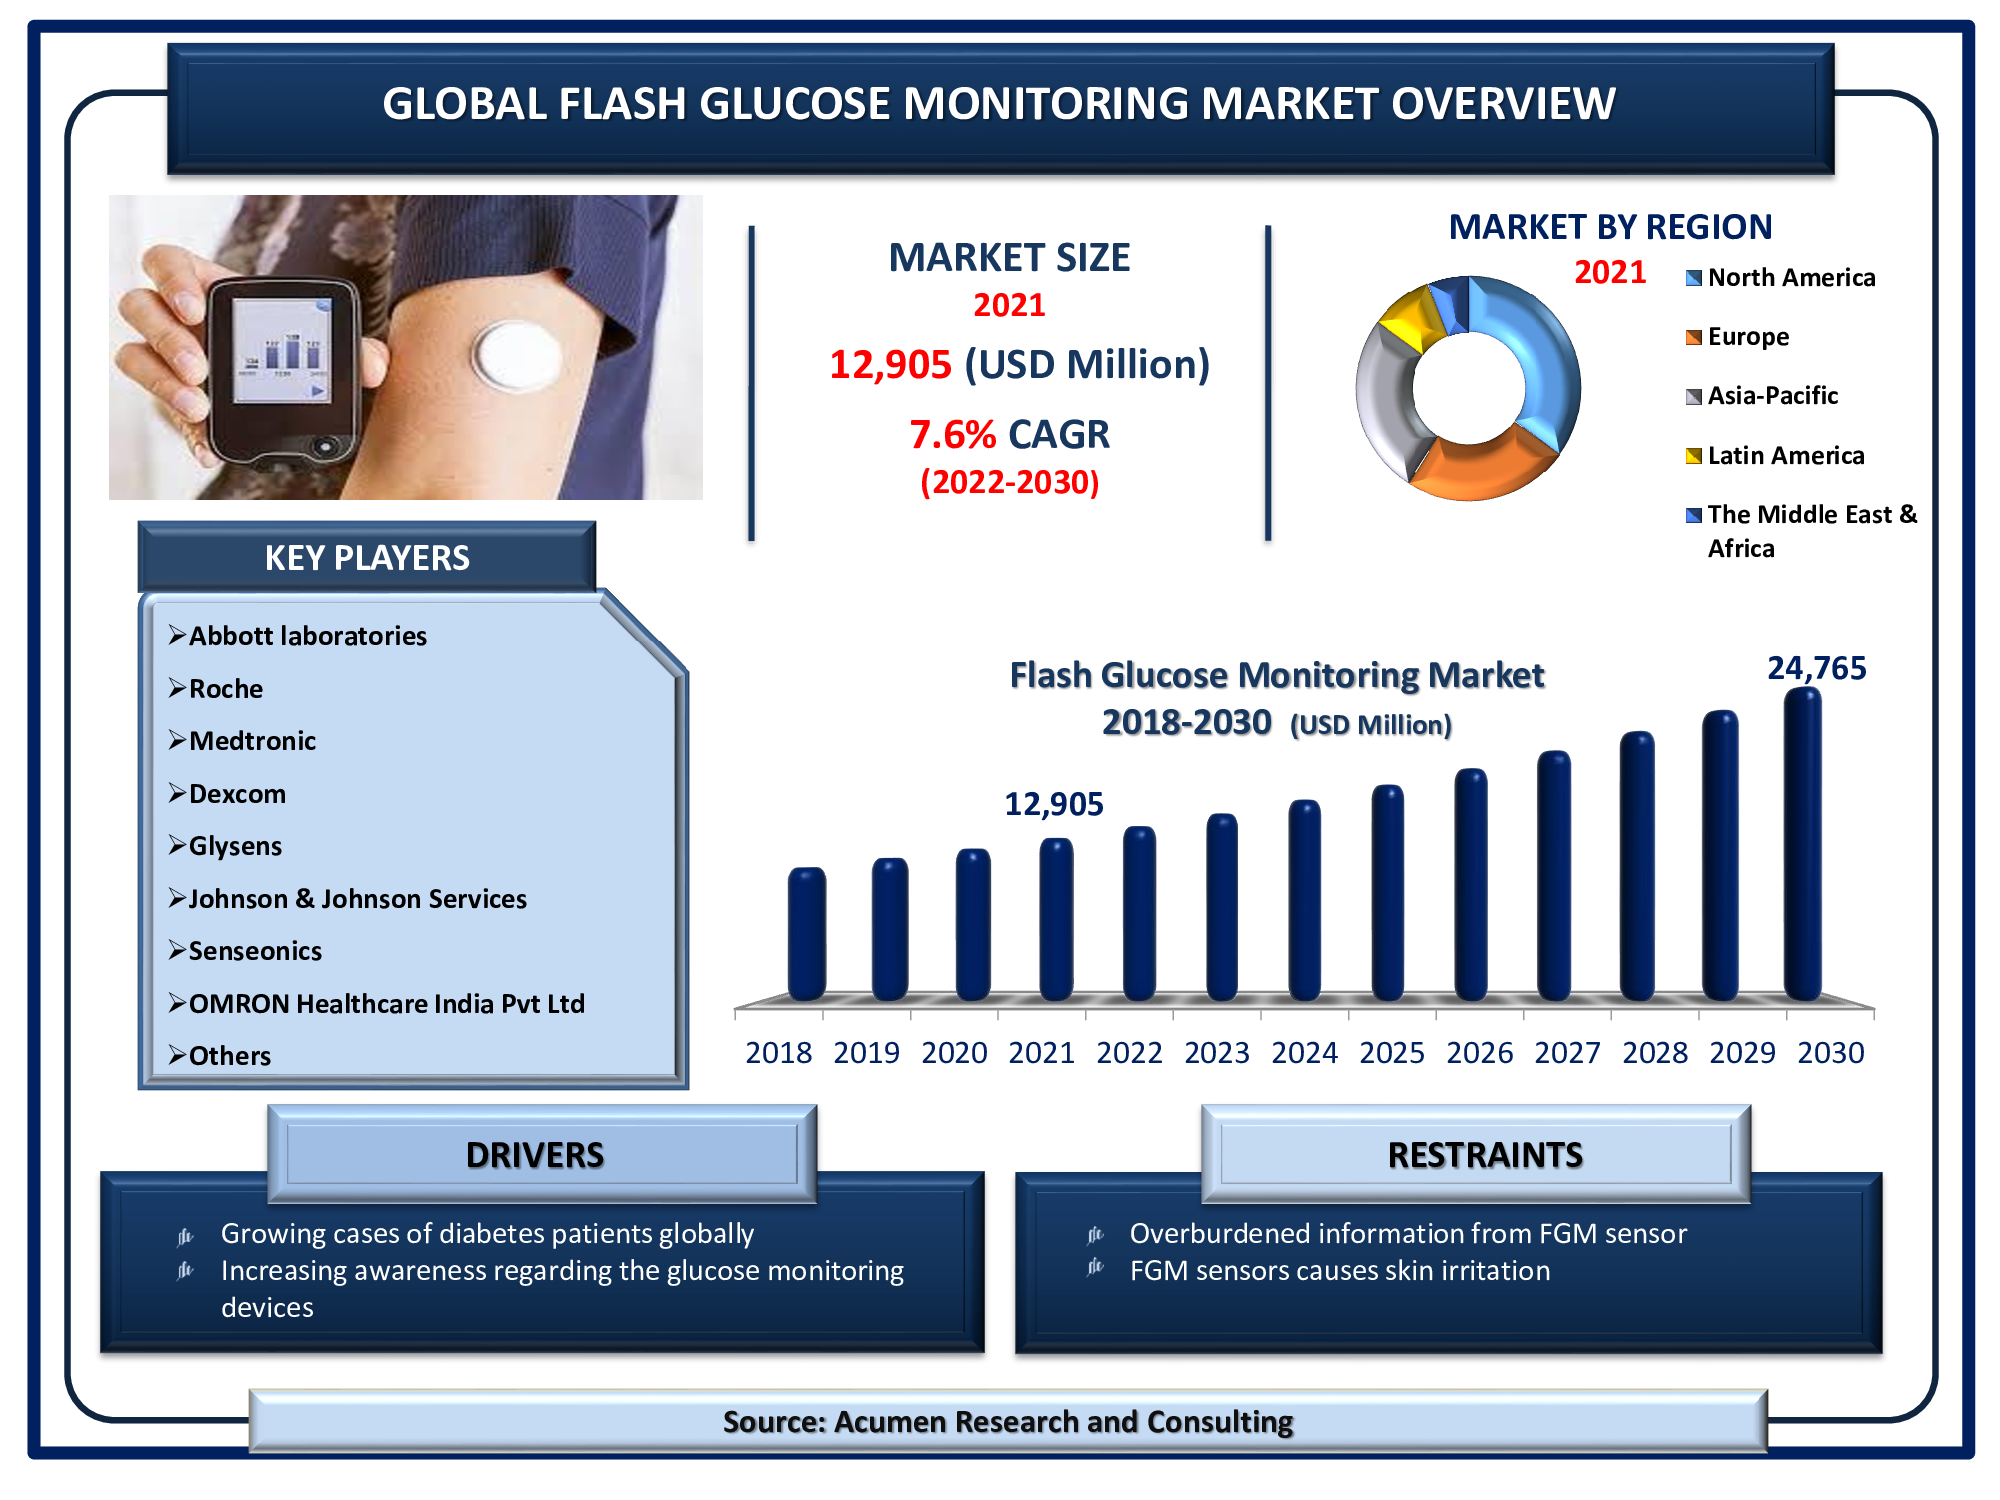 The Global Flash Glucose Monitoring Market Size is valued at USD 12,905 million in 2021 and is estimated to achieve a market size of USD 24,765 million by 2030; growing at a CAGR of 7.6%.